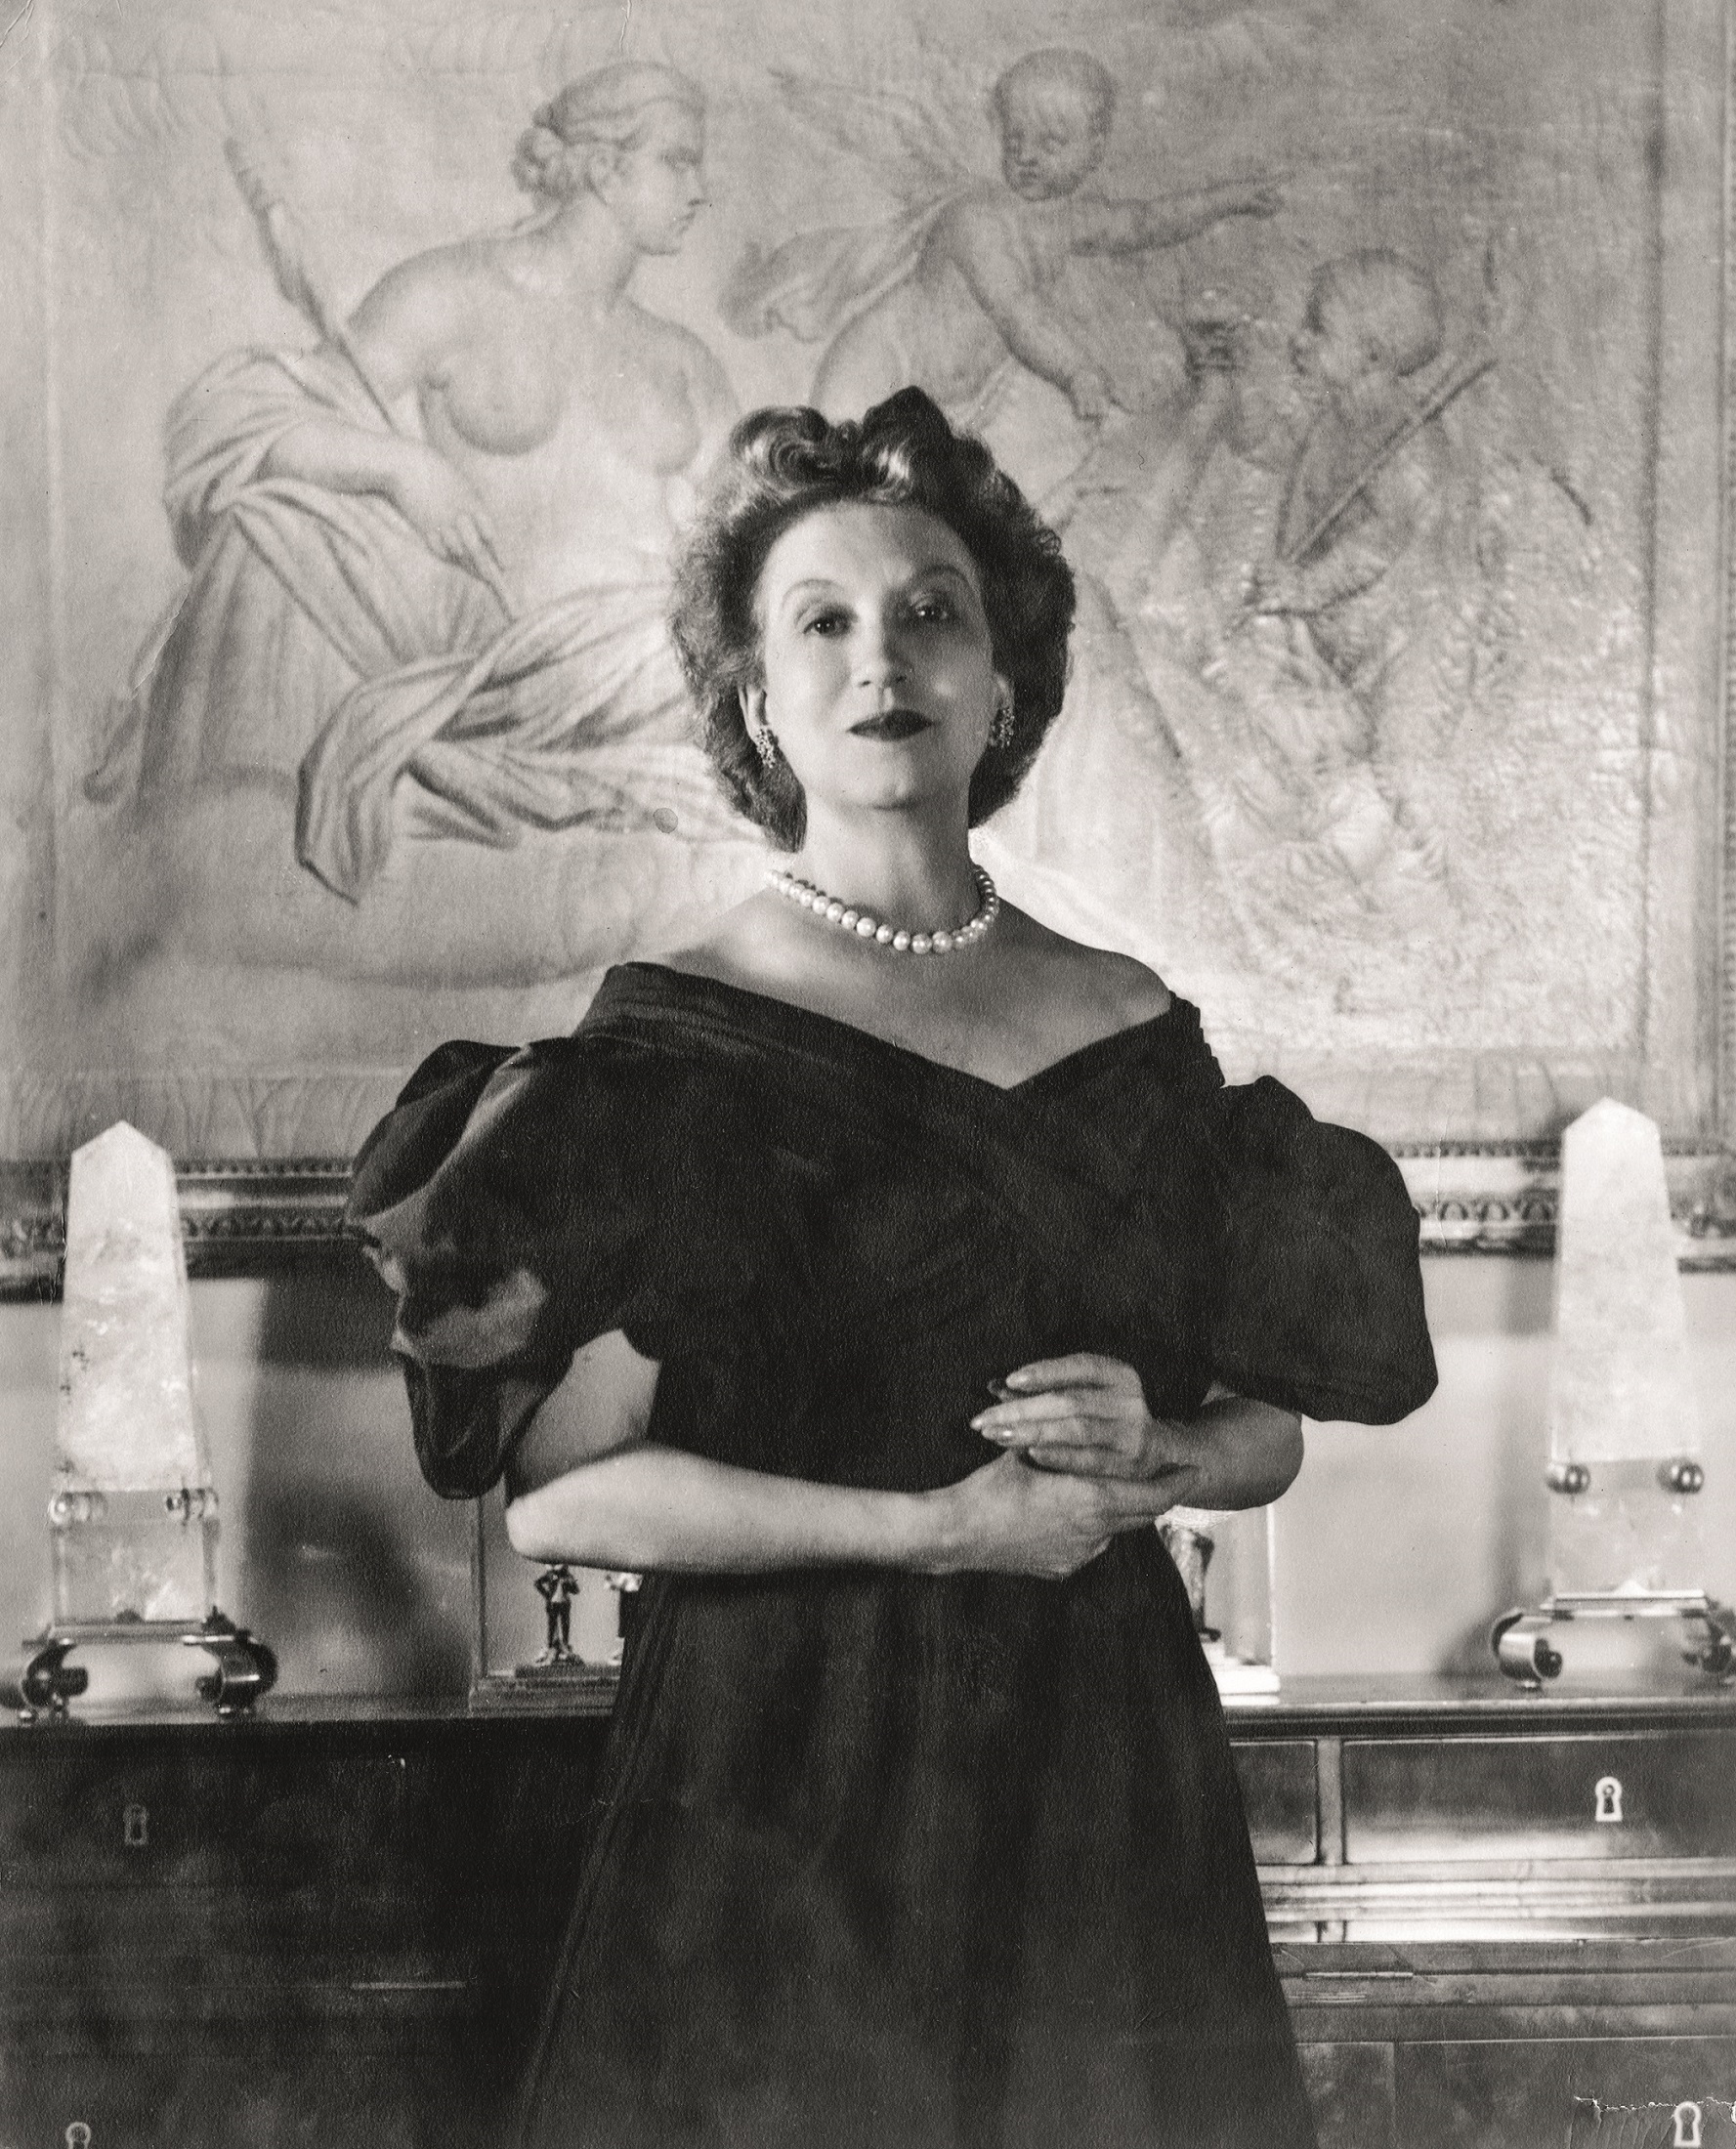 Portrait of Canadian-born beautician and cosmetics entrepreneur Elizabeth Arden (1878 - 1966) dressed in a ball gown as she clasps her hands together and stands in front of a framed piece of art, 1947. (Photo by Hulton Archive/Getty Images) 